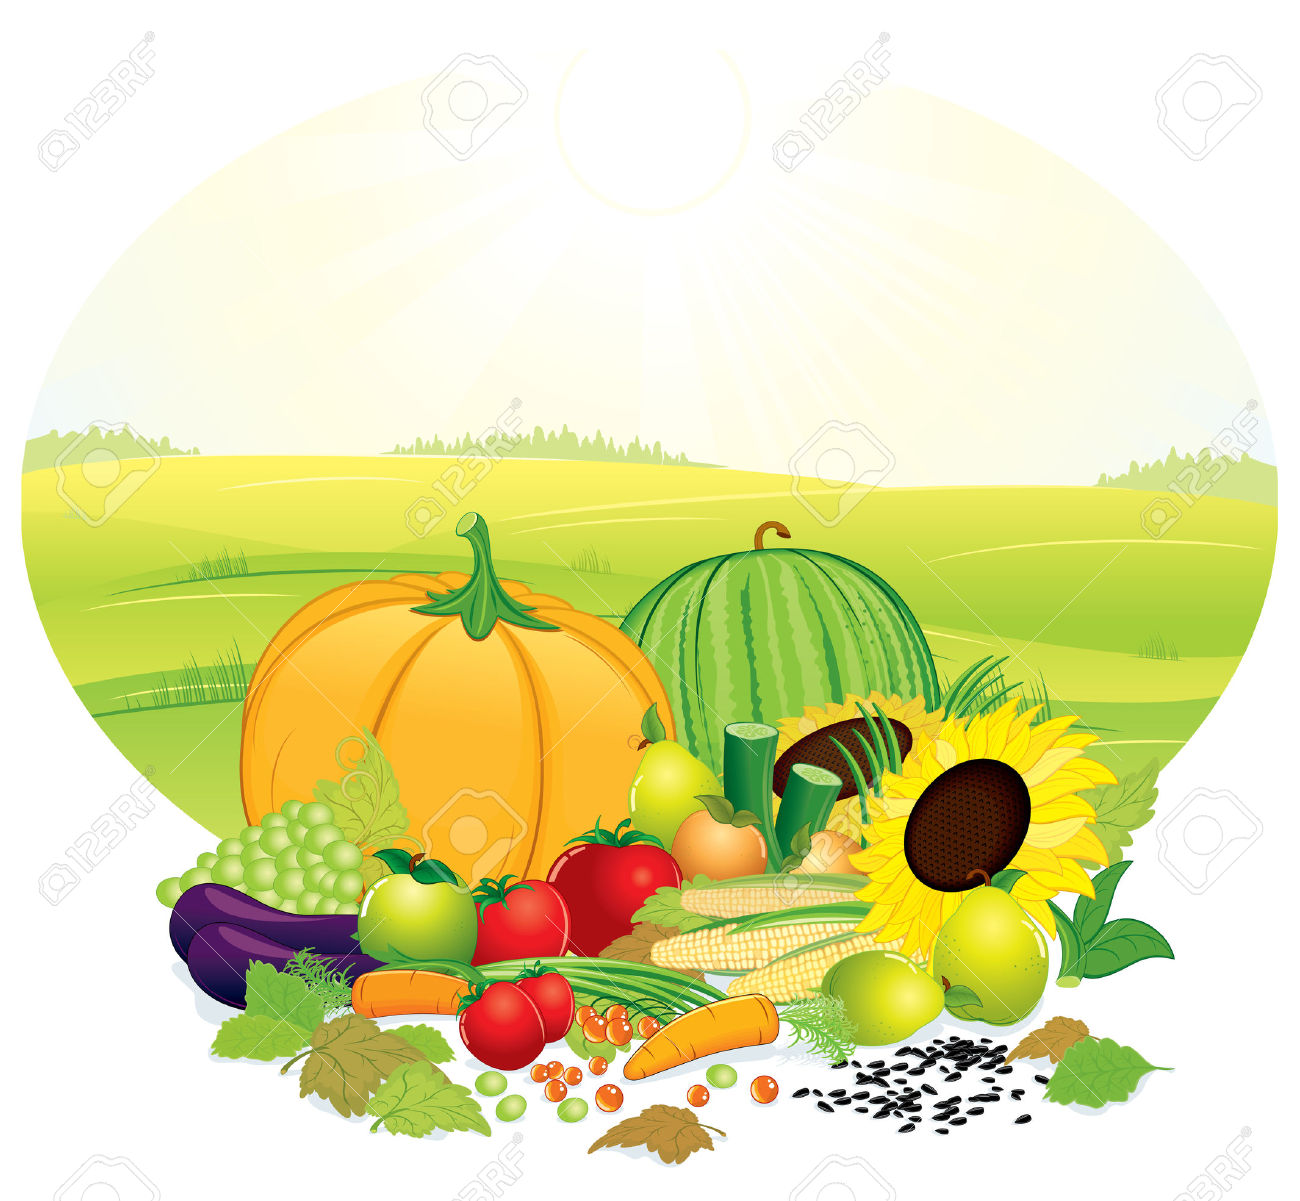 Harvesting Crops Clipart.